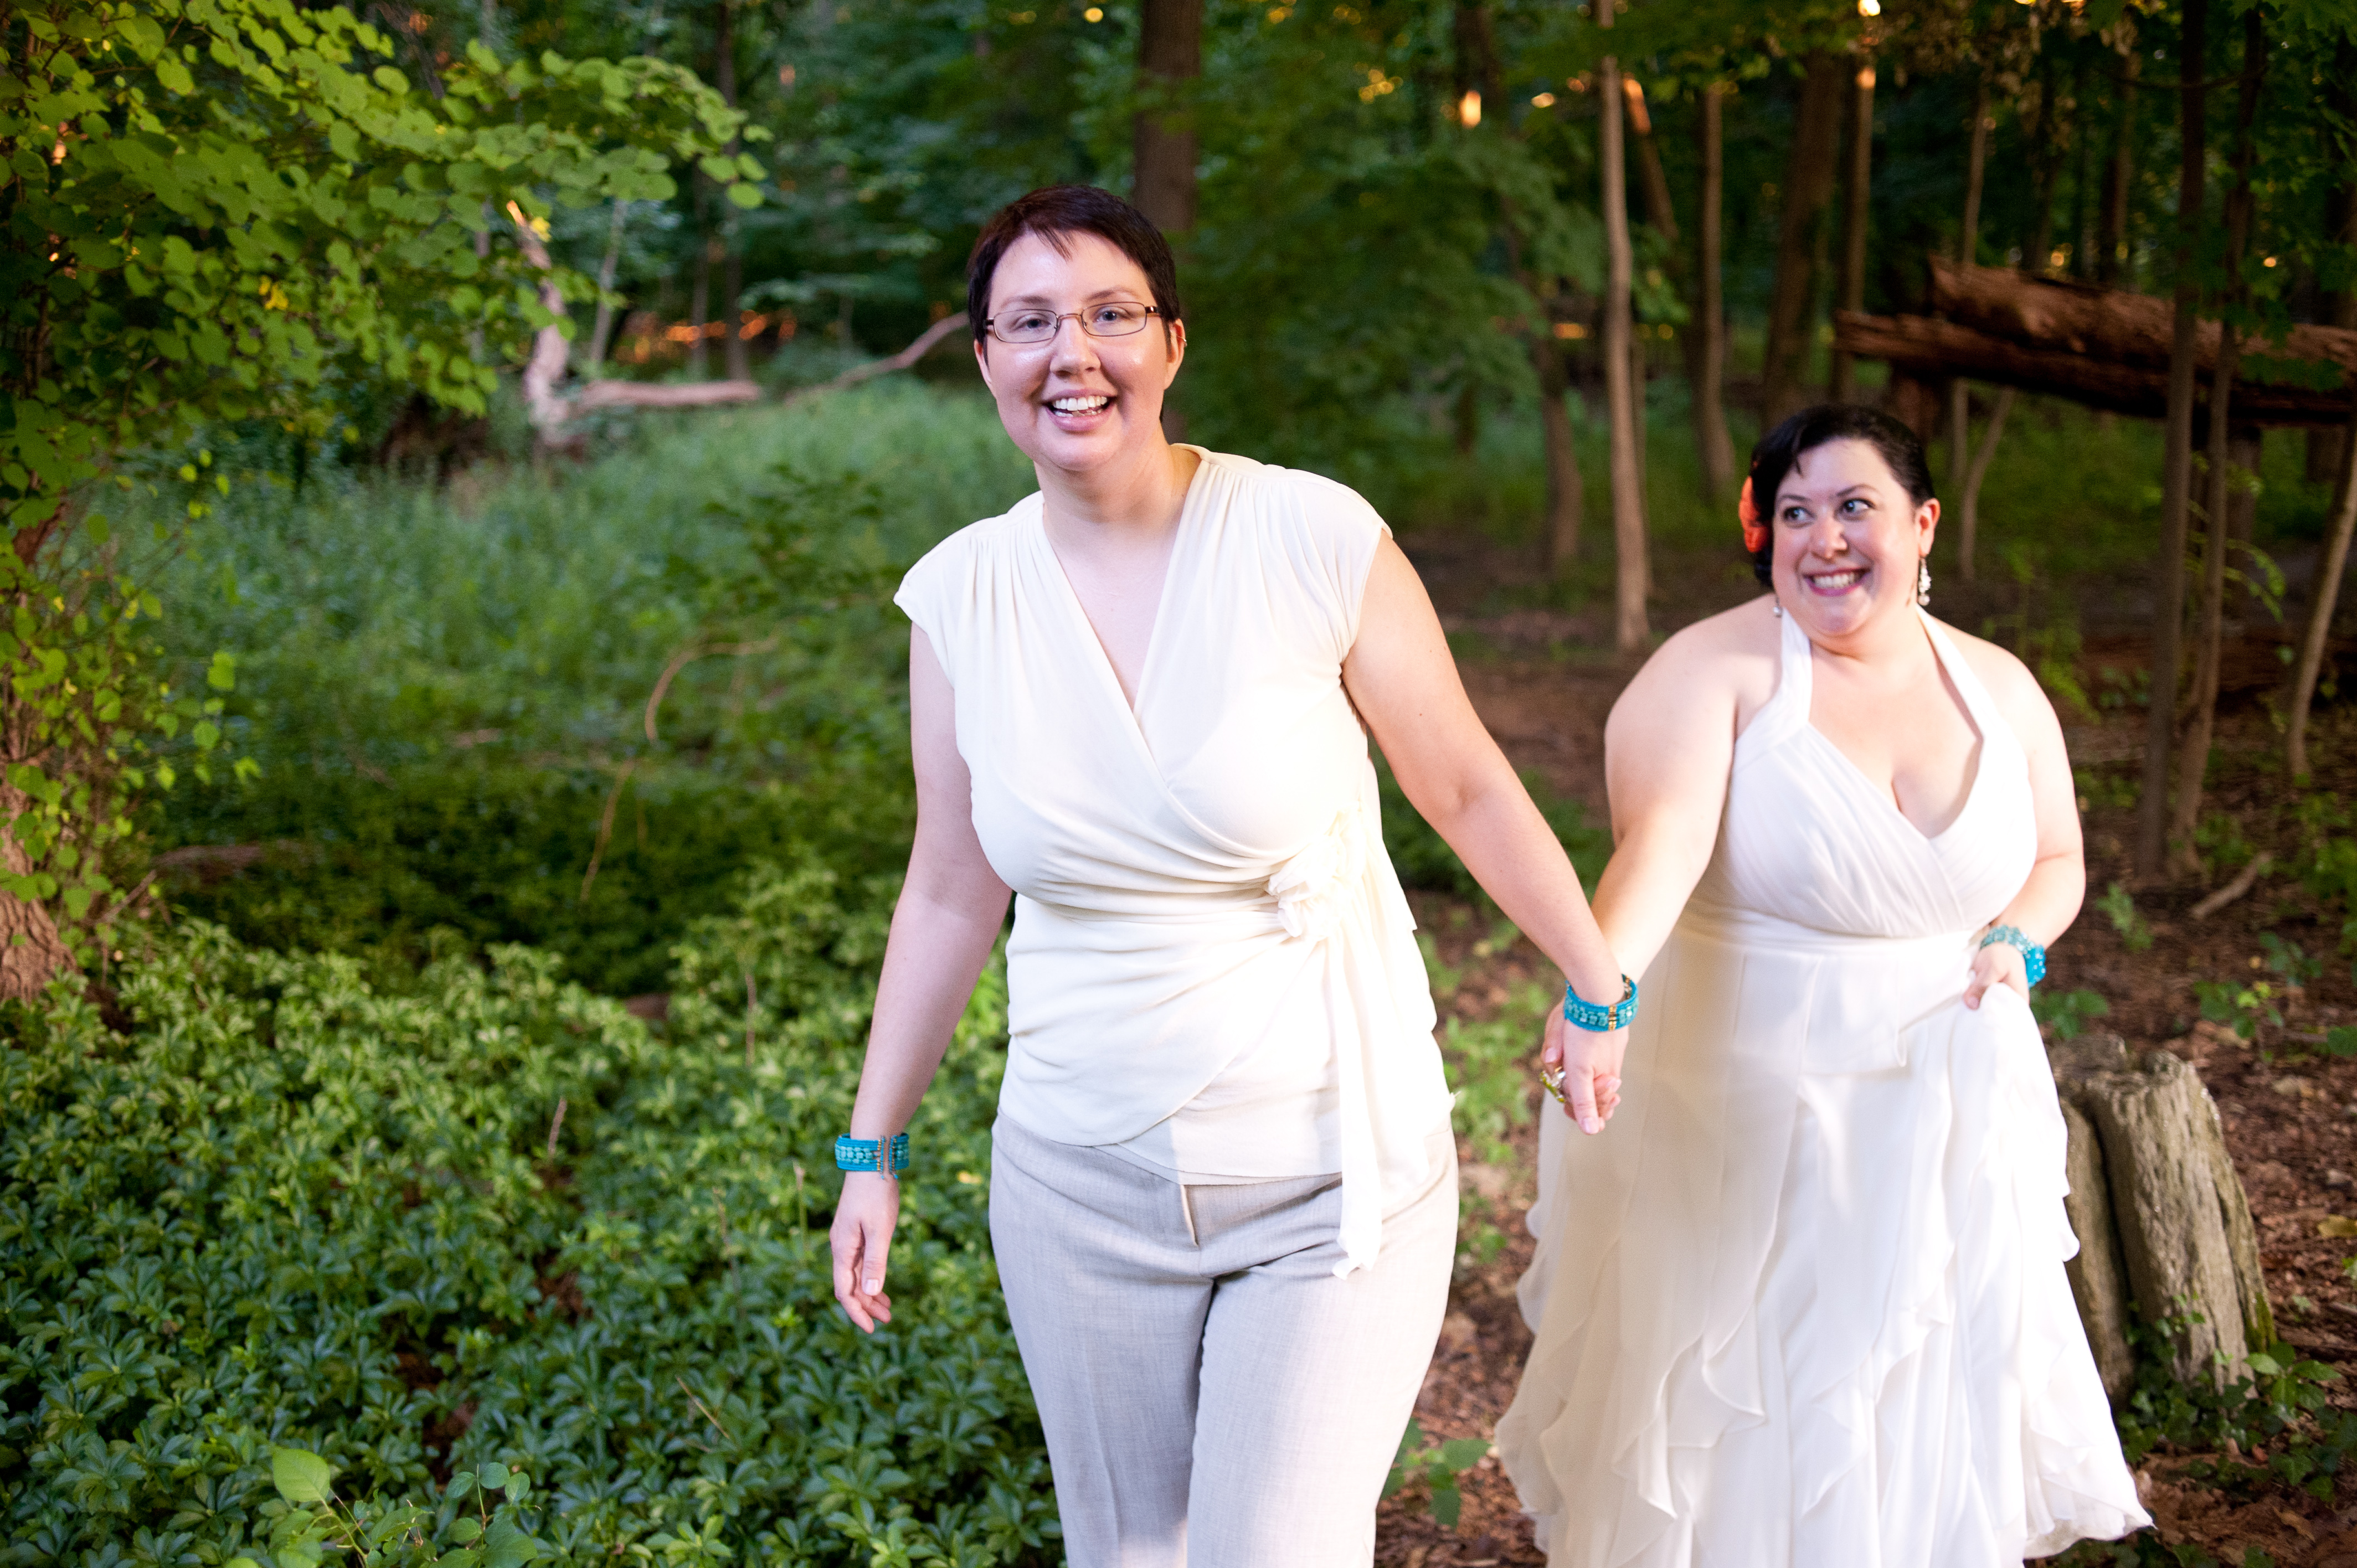 Philly Wedding Photographer Allebach Photography